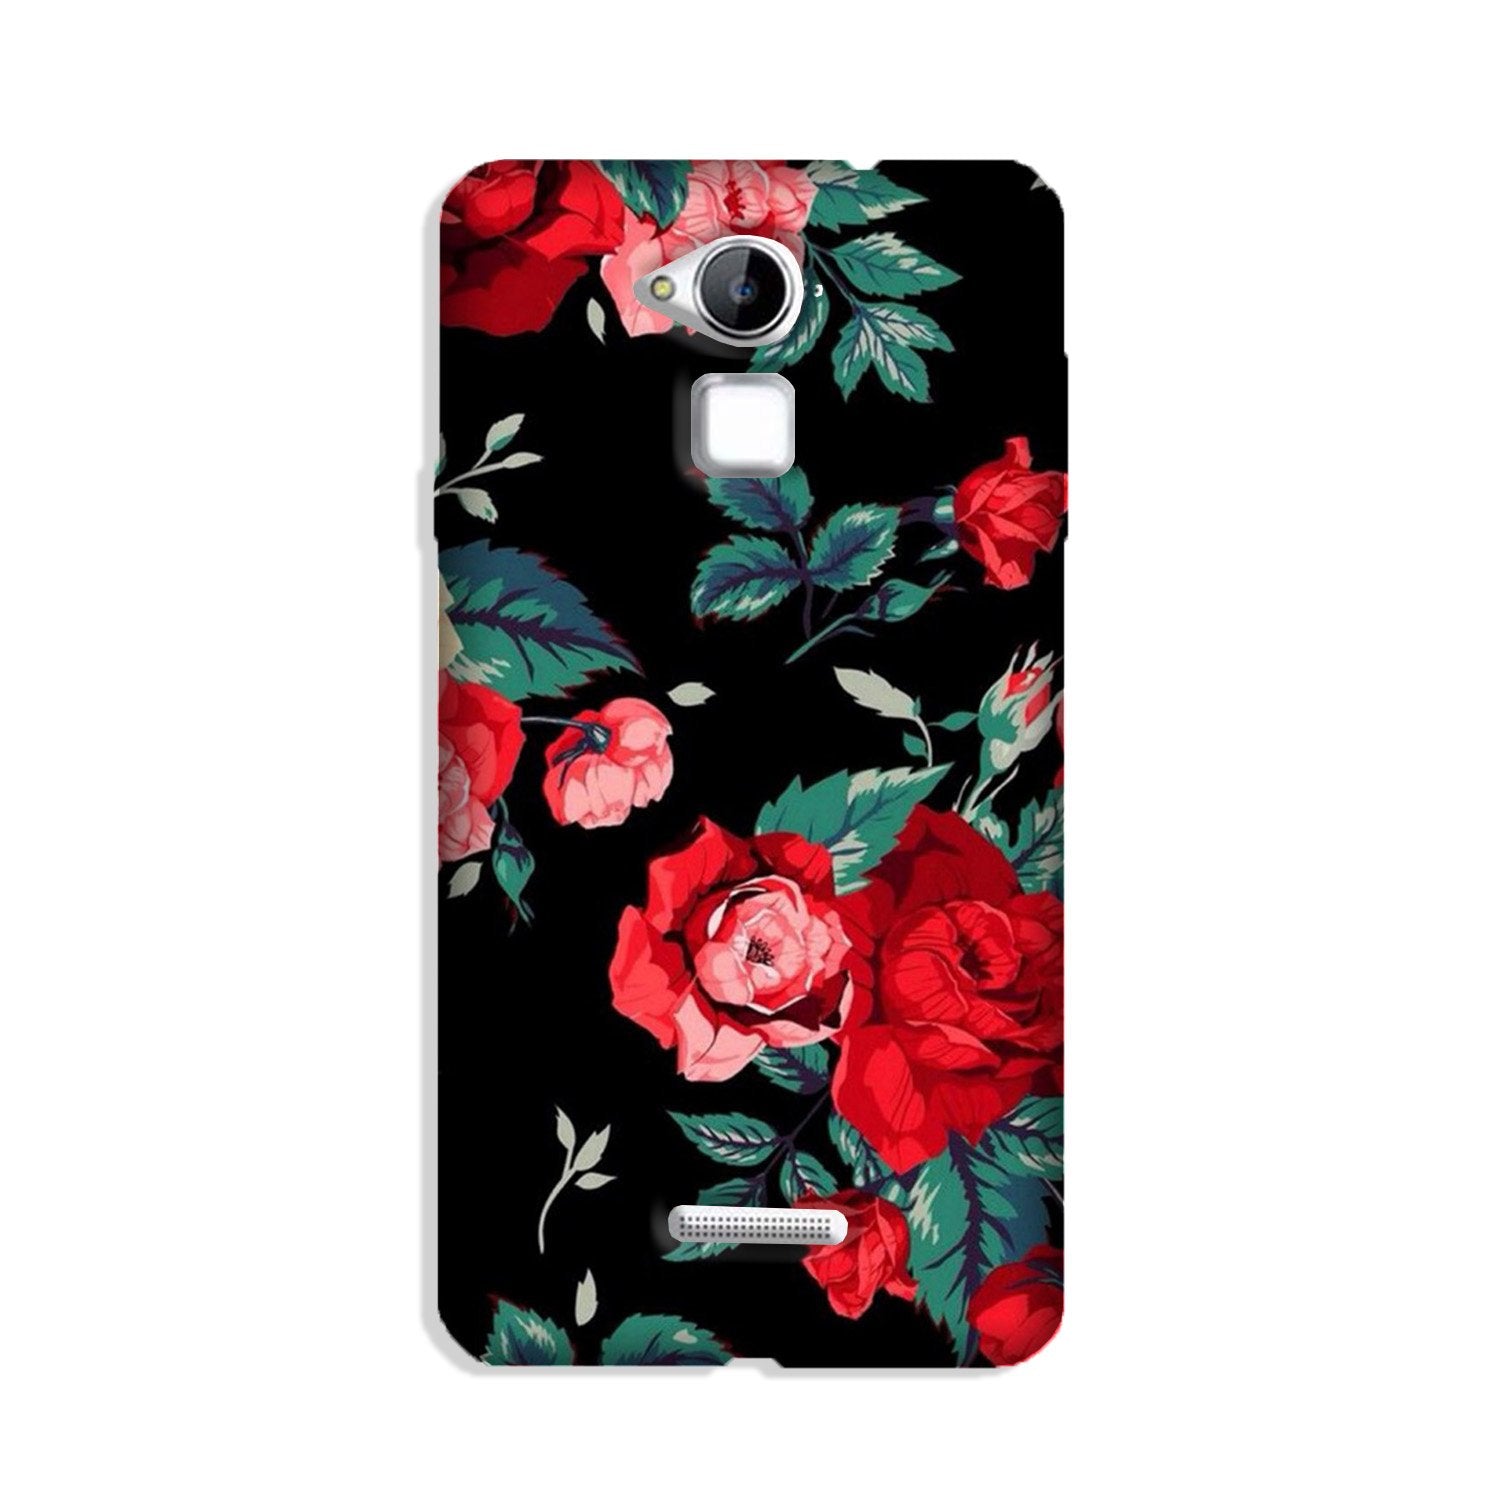 Red Rose Case for Coolpad Note 3